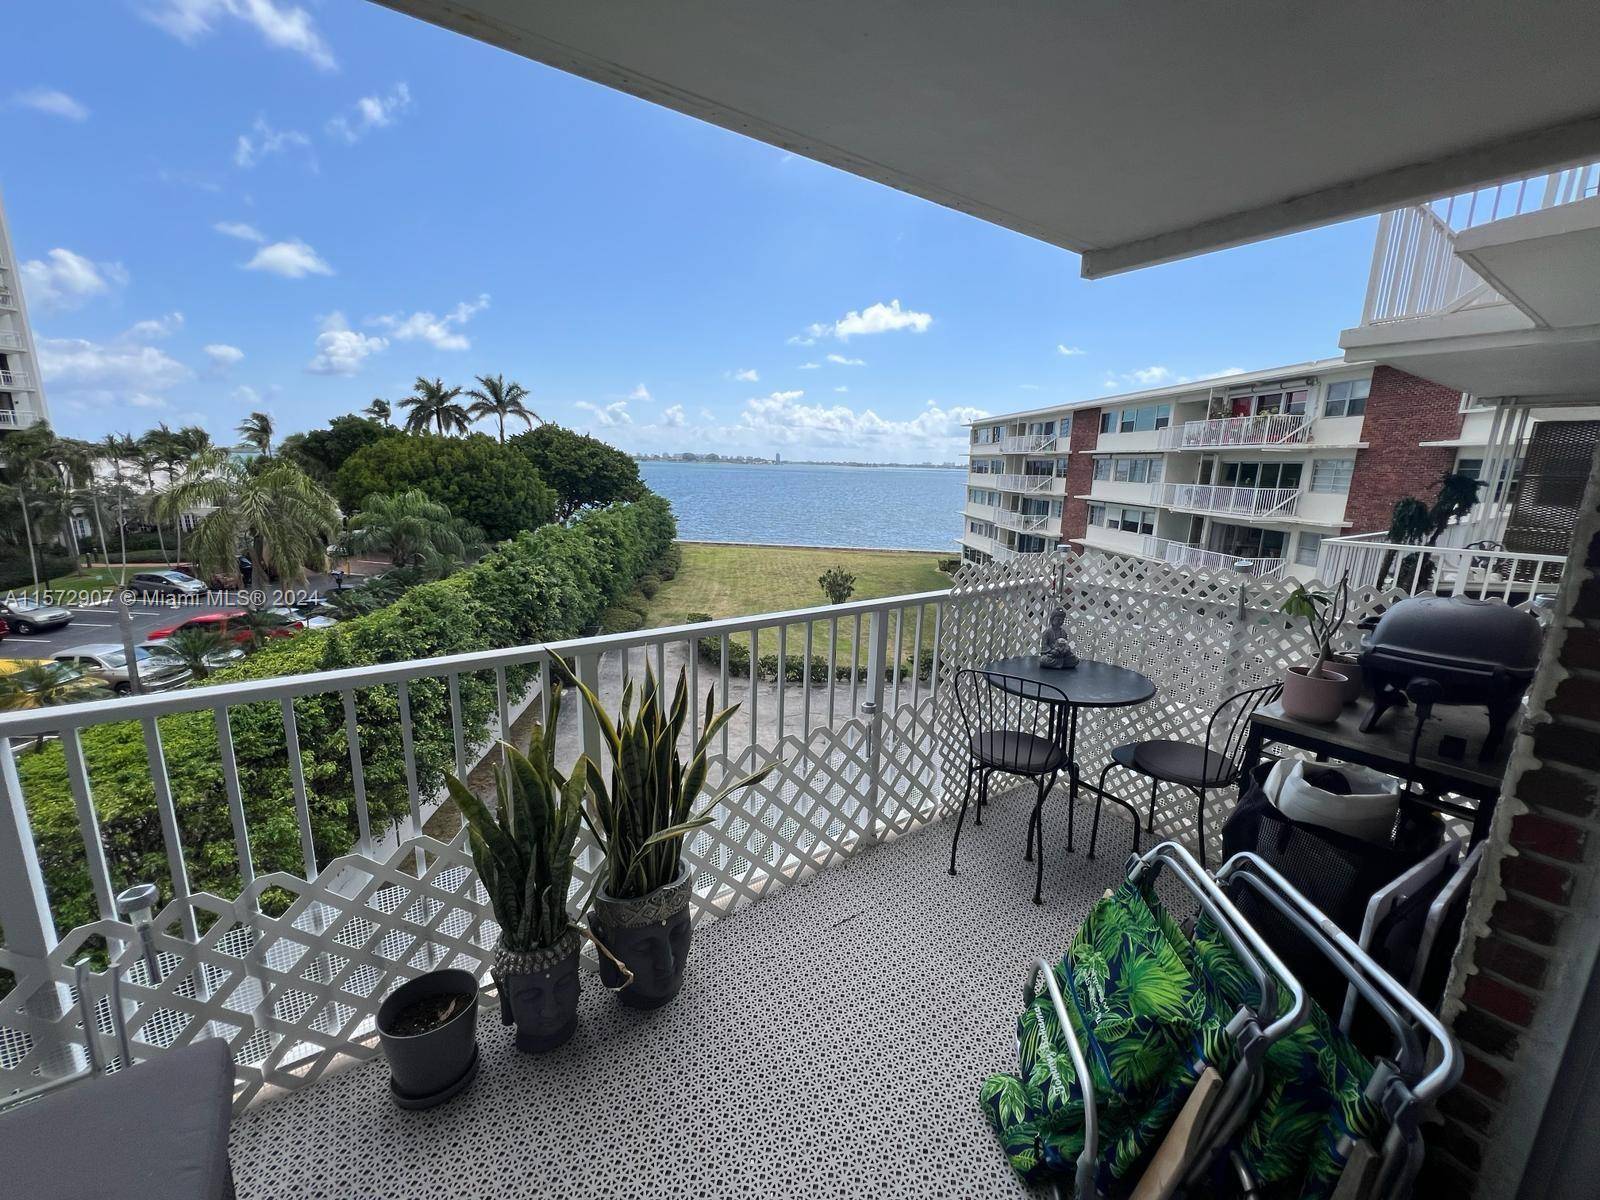 Espectacular apartment 2 bedrooms 2 bathrooms, very spacious with an amazing water view.